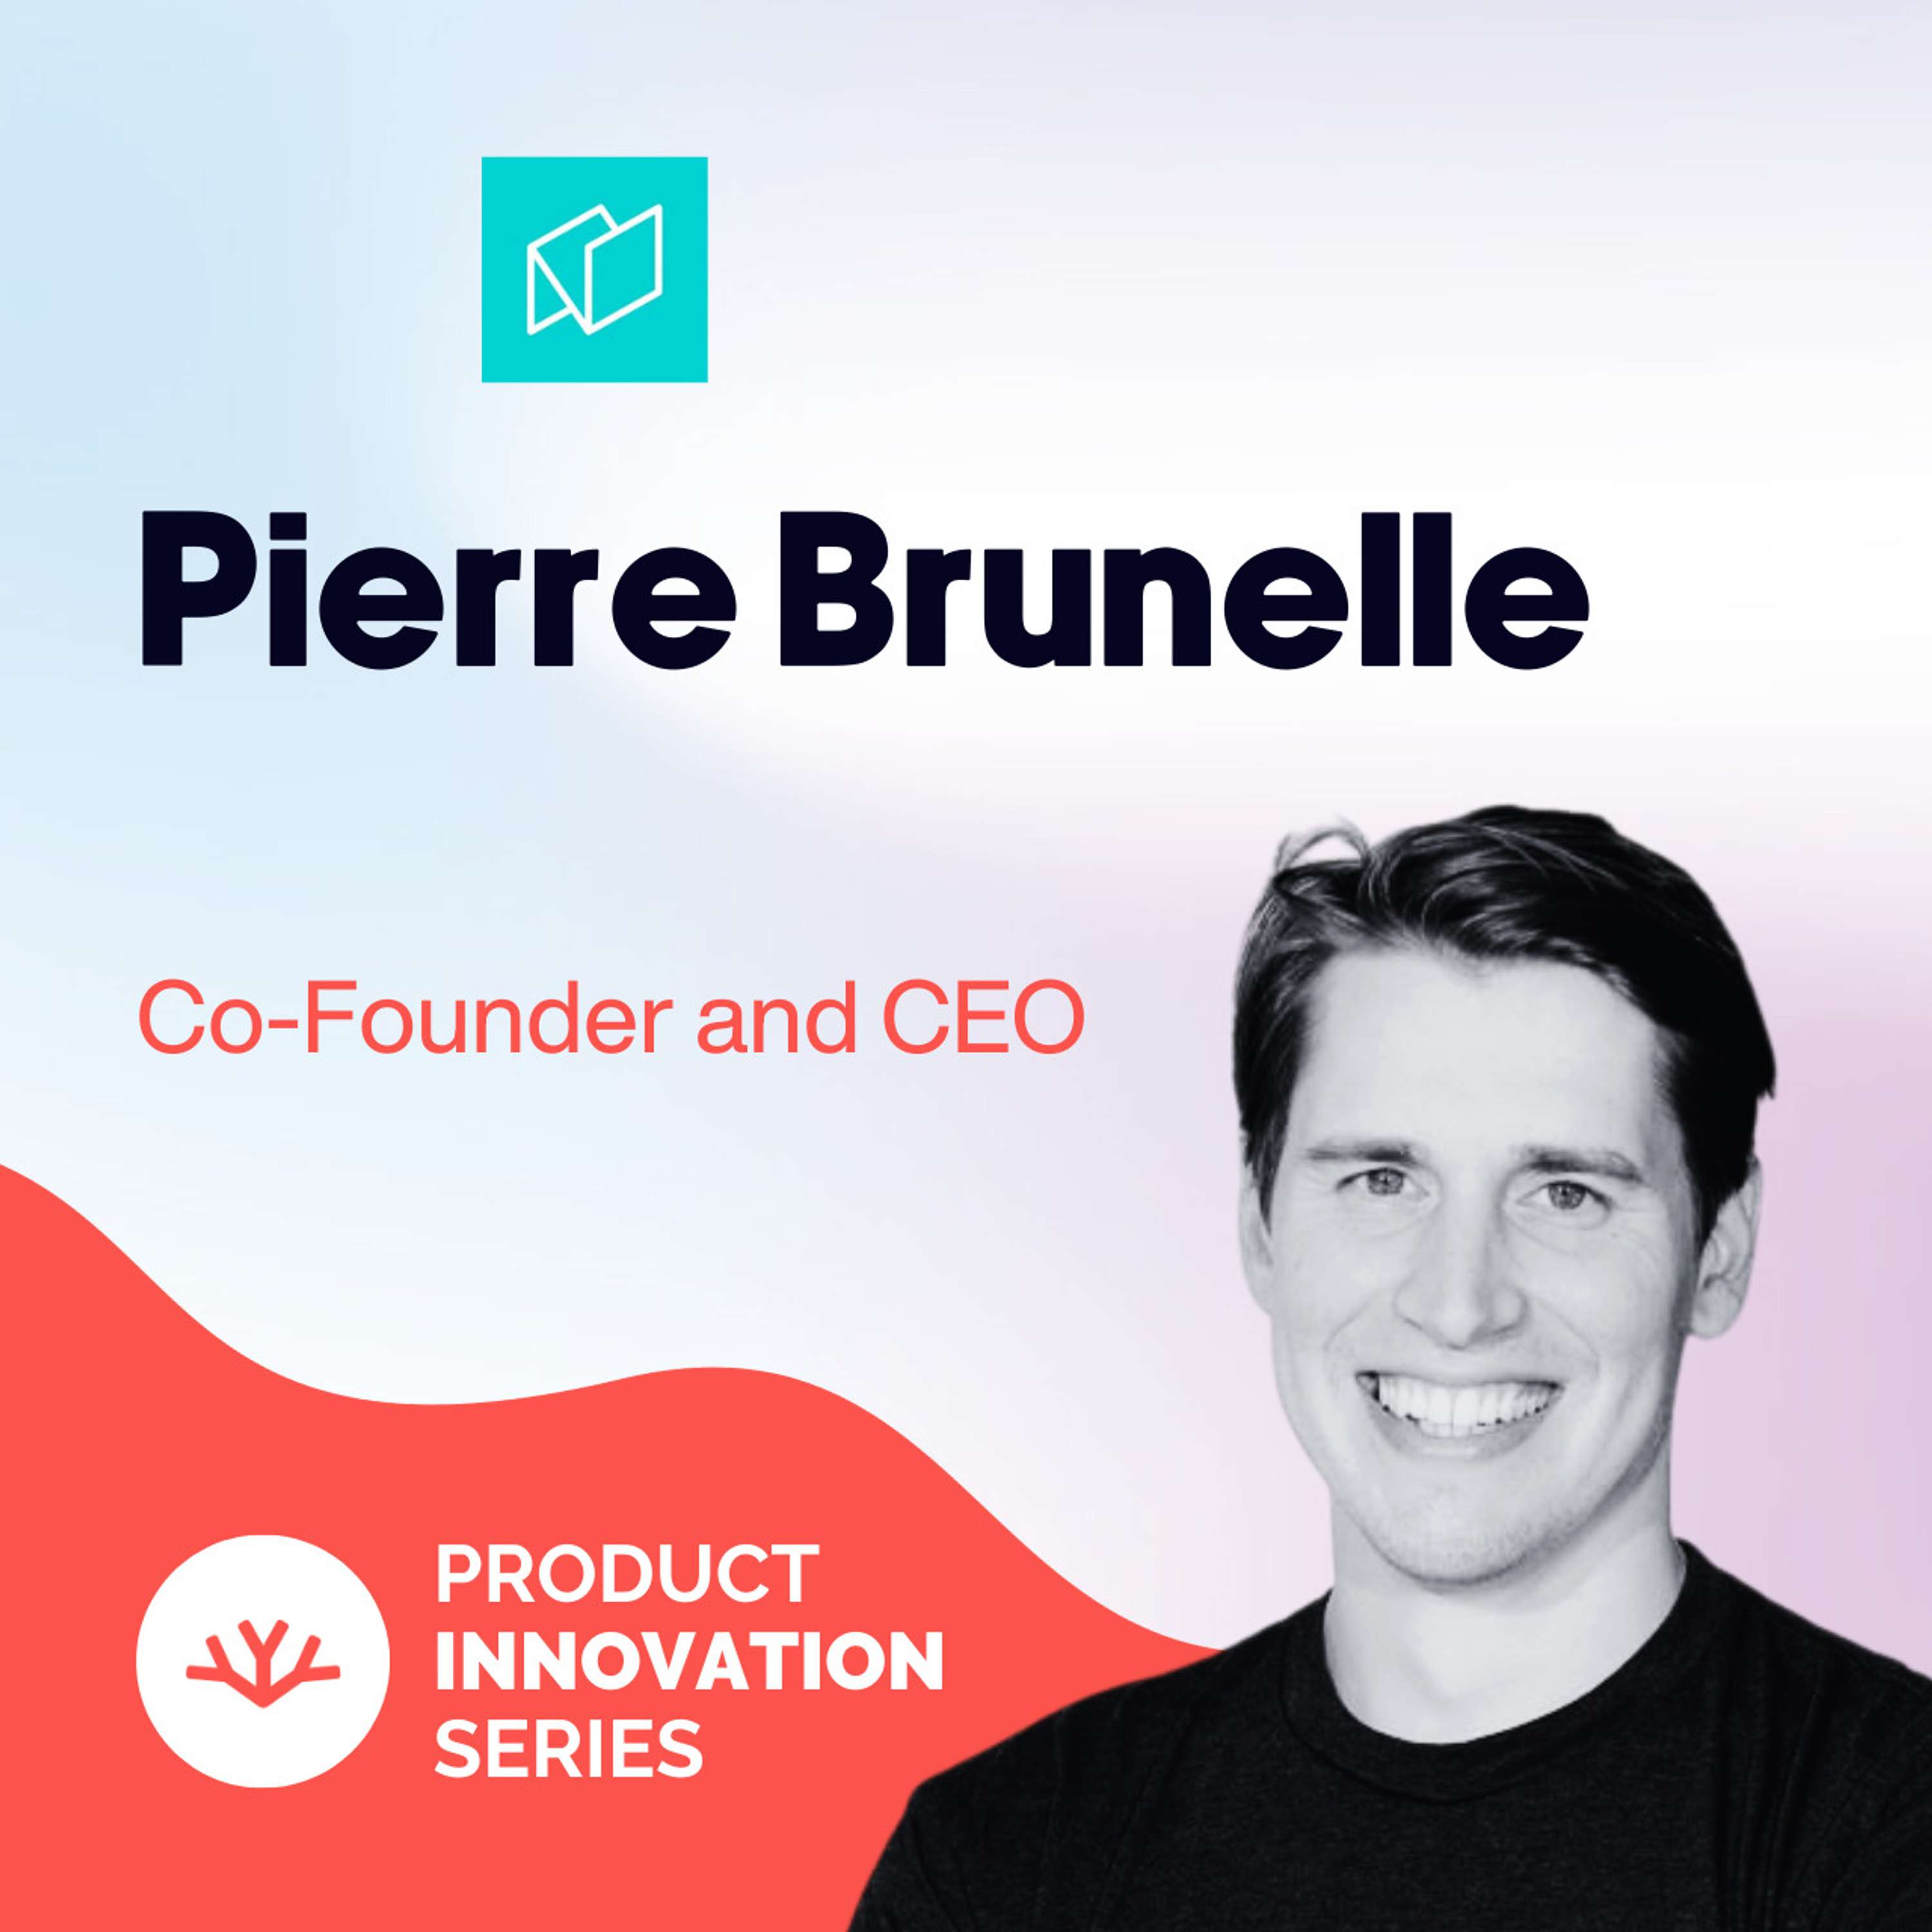 Amazon Product Lessons You Can Apply Today - Pierre Brunelle, Noteable